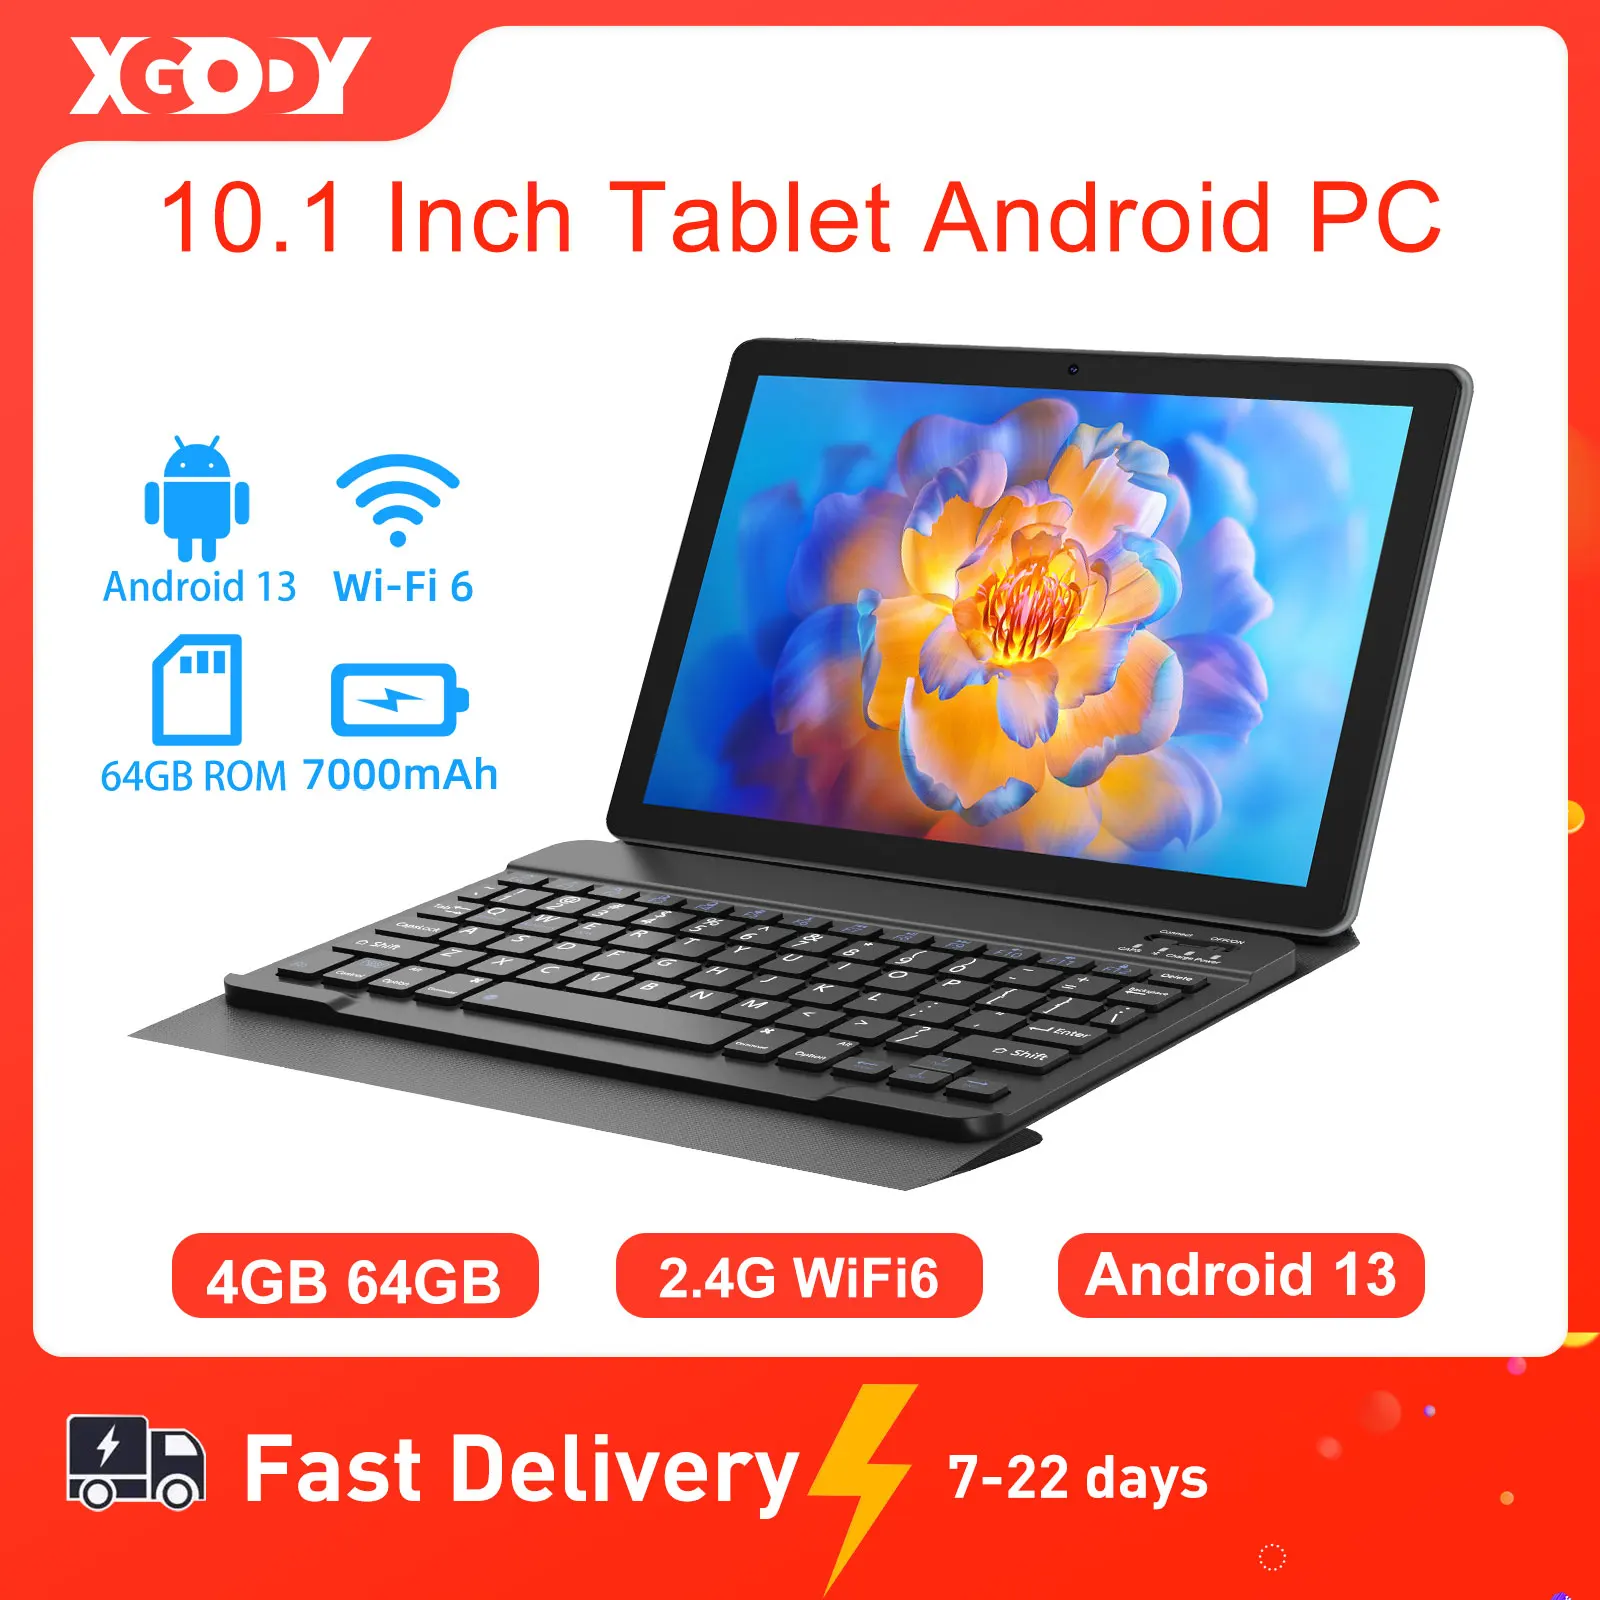 

XGODY WiFi Tablet Android Pc 10.1 Inch Kids Learning Education Tablets Children's Gift 4GB RAM 64GB ROM Quad-core 7000mAh